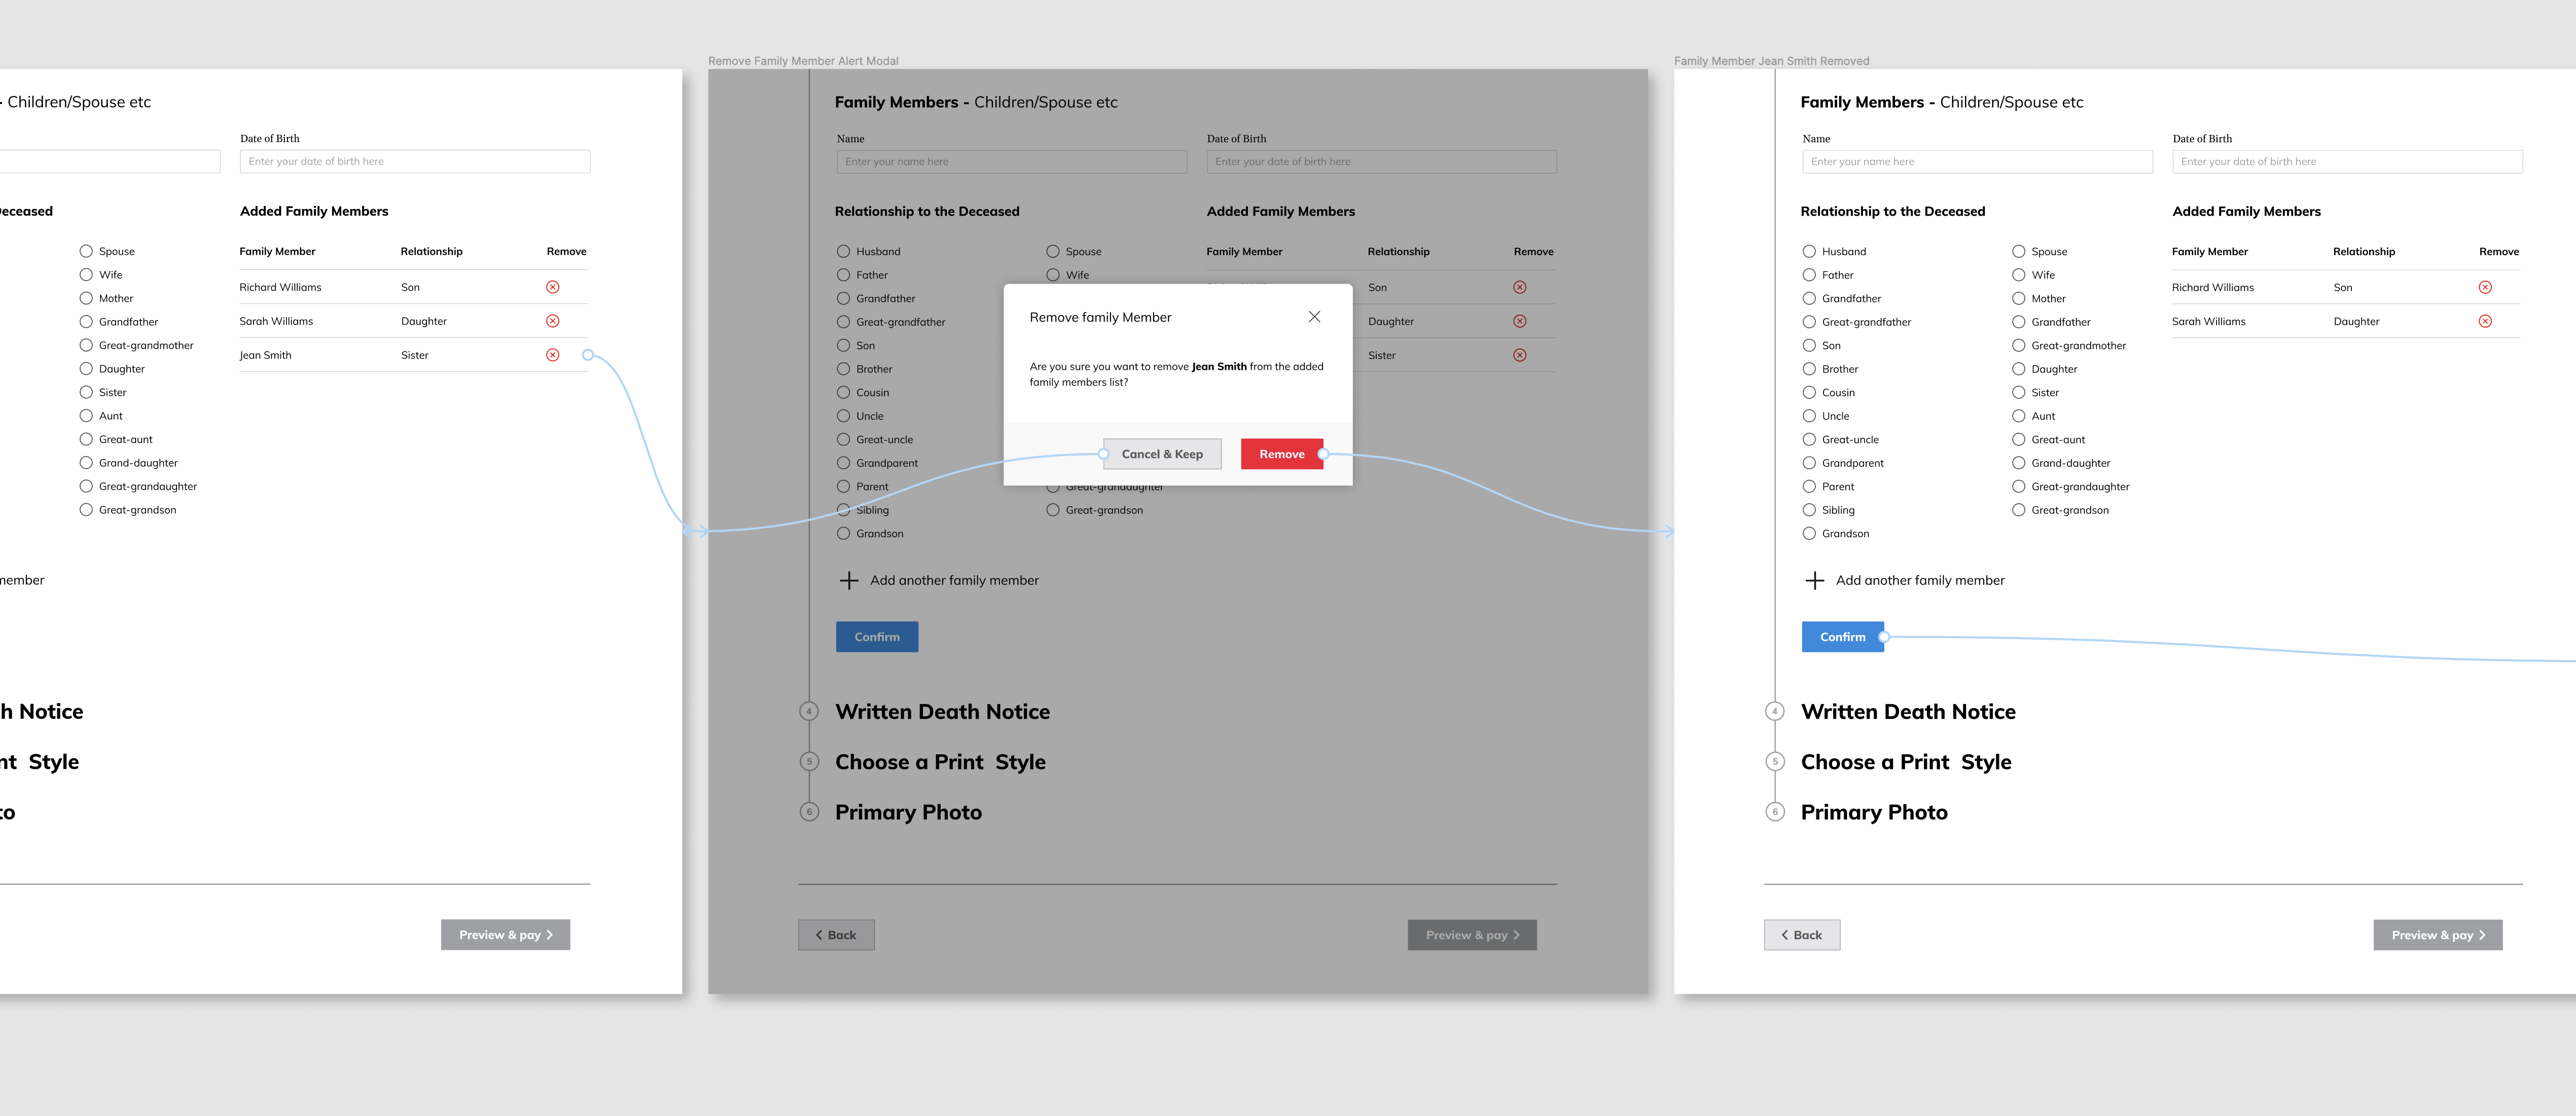 An image of the removing a family Member concept in Figma.